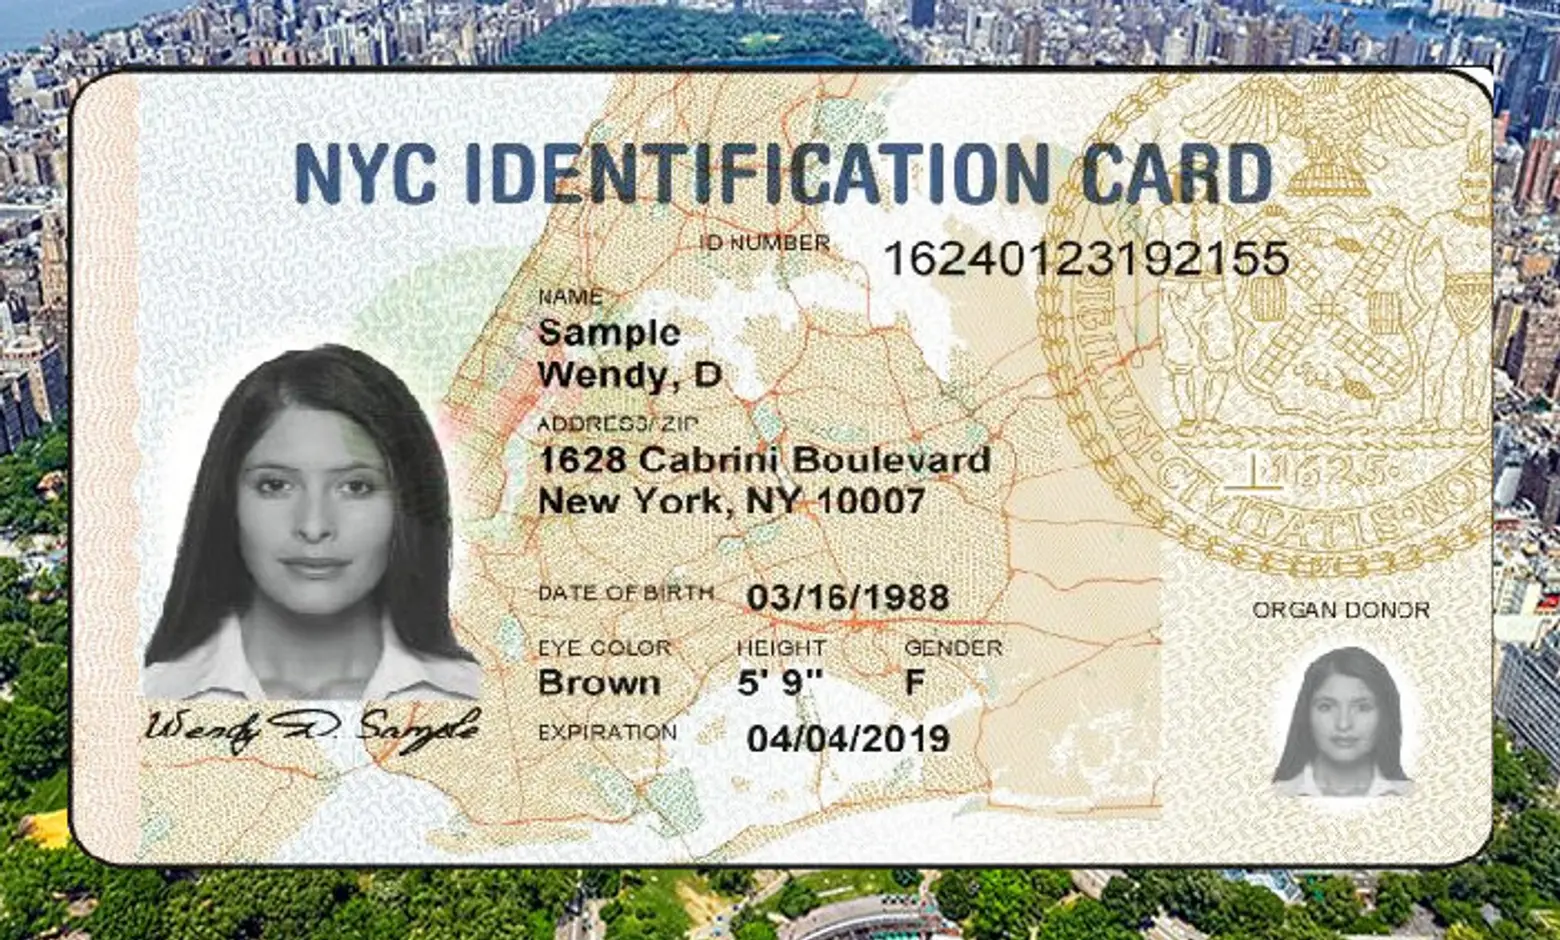 College students and children as young as 10 can now apply for IDNYC